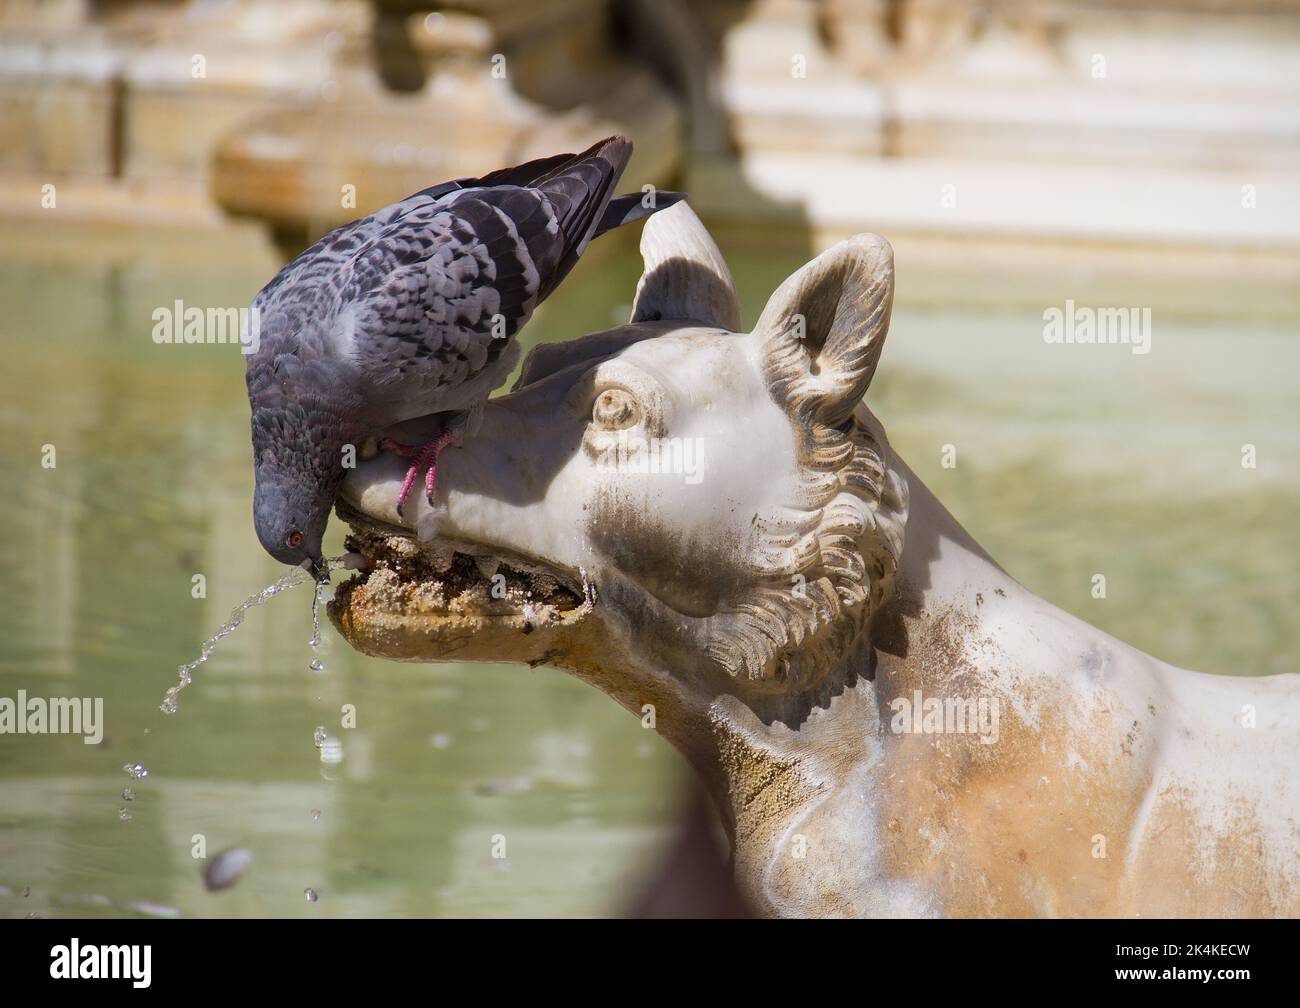 Thirsty pigeon drinking water from fountain in the shape of a dog, teeth of dog with lime scale, Sienna, Italy Stock Photo